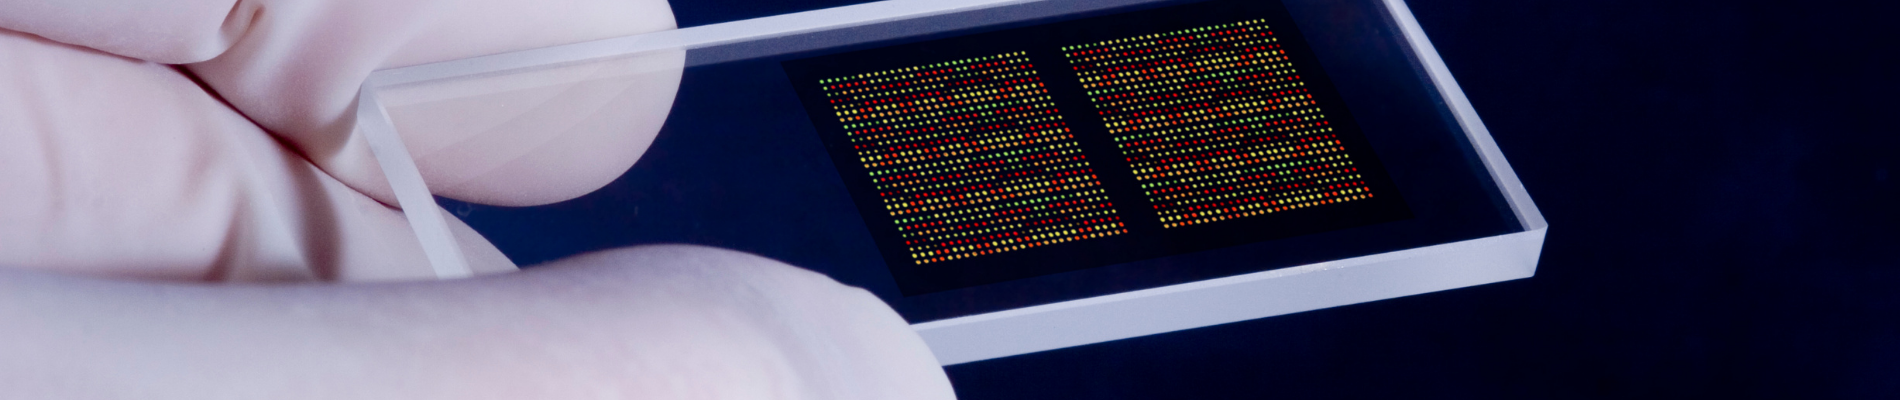 microarray chip